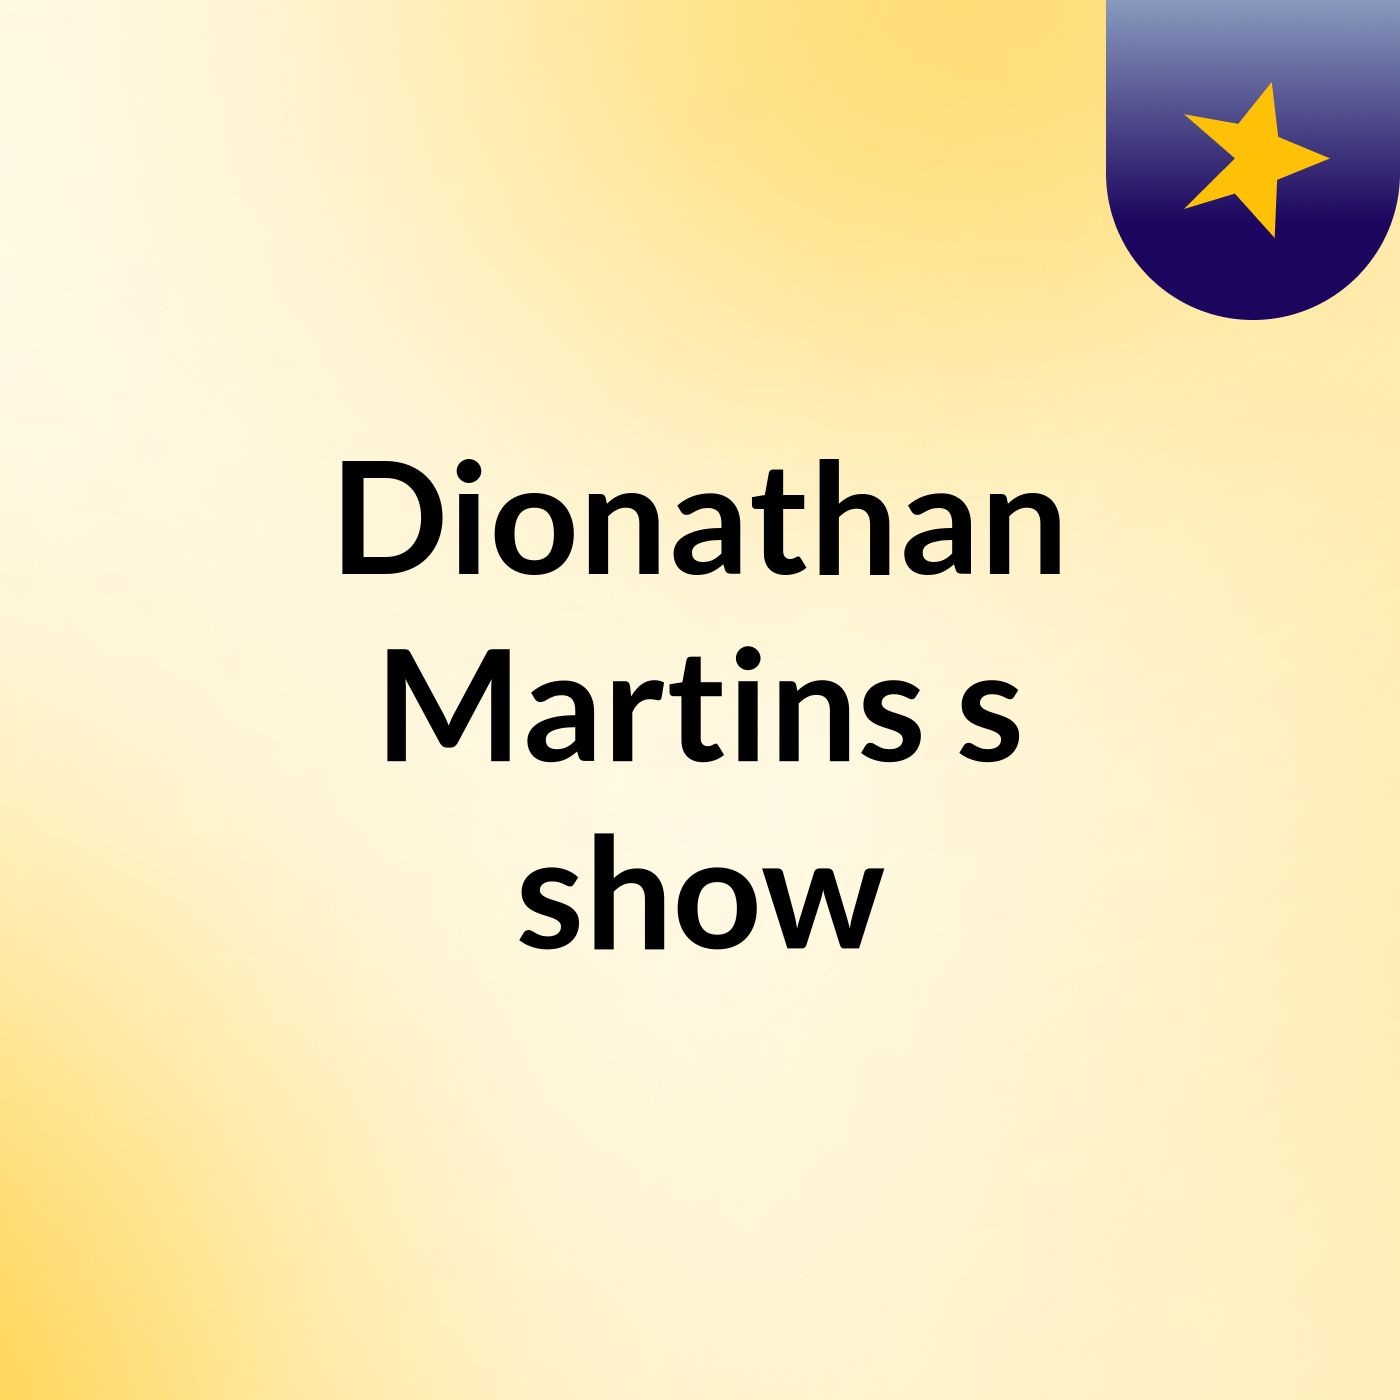 Dionathan Martins's show